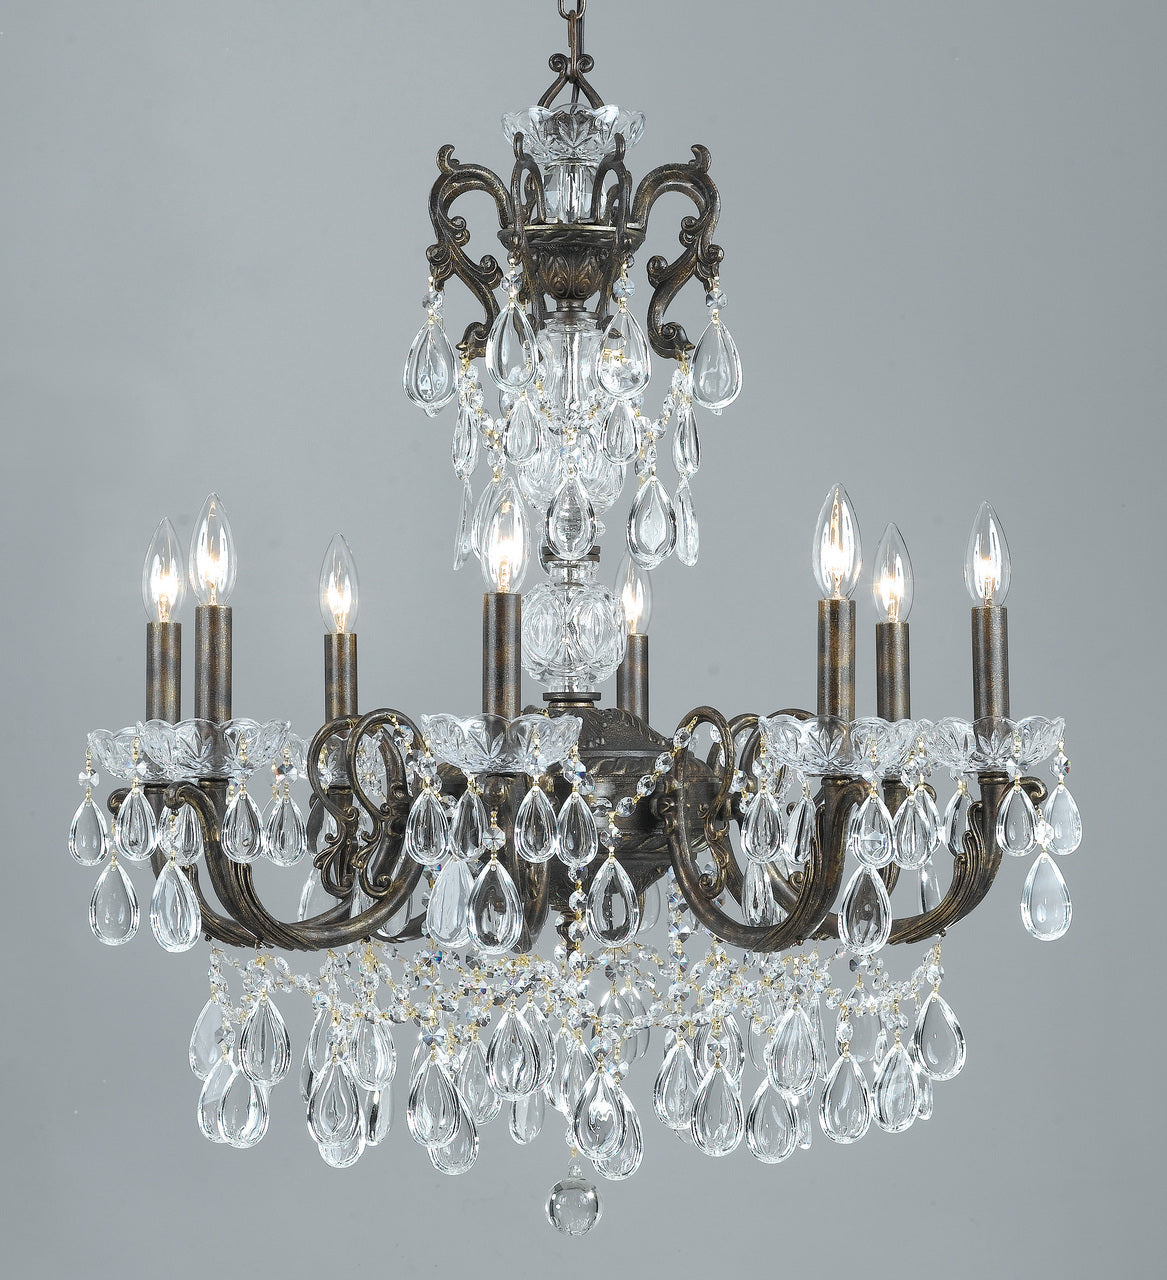 Classic Lighting 69808 EBG C Vienna Palace Crystal Chandelier in English Bronze/Gold